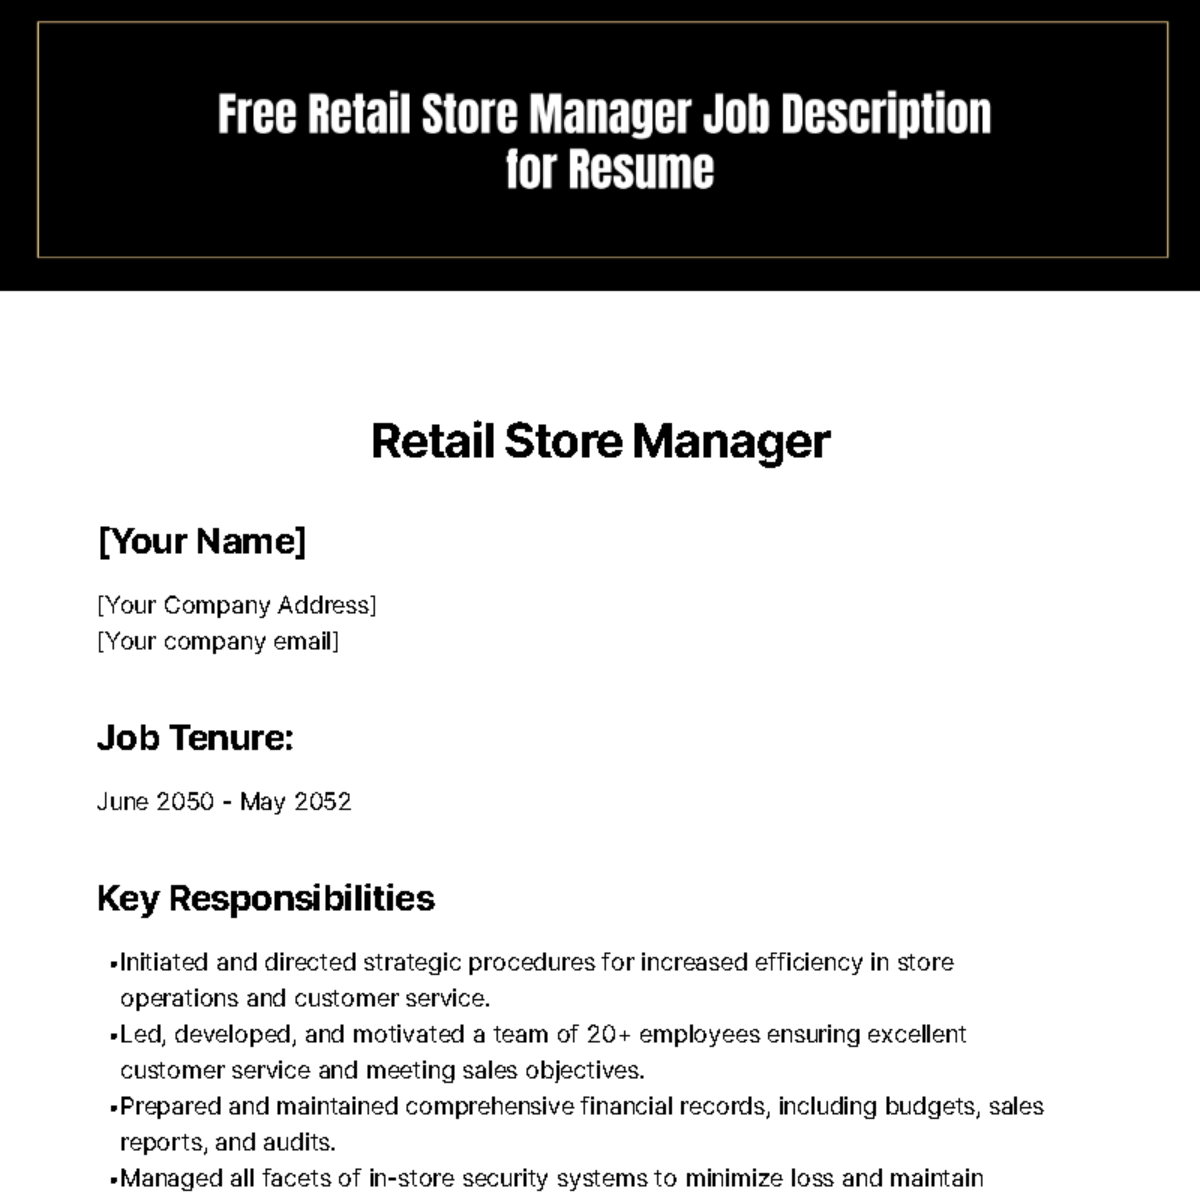 Free Retail Store Manager Job Description for Resume Template